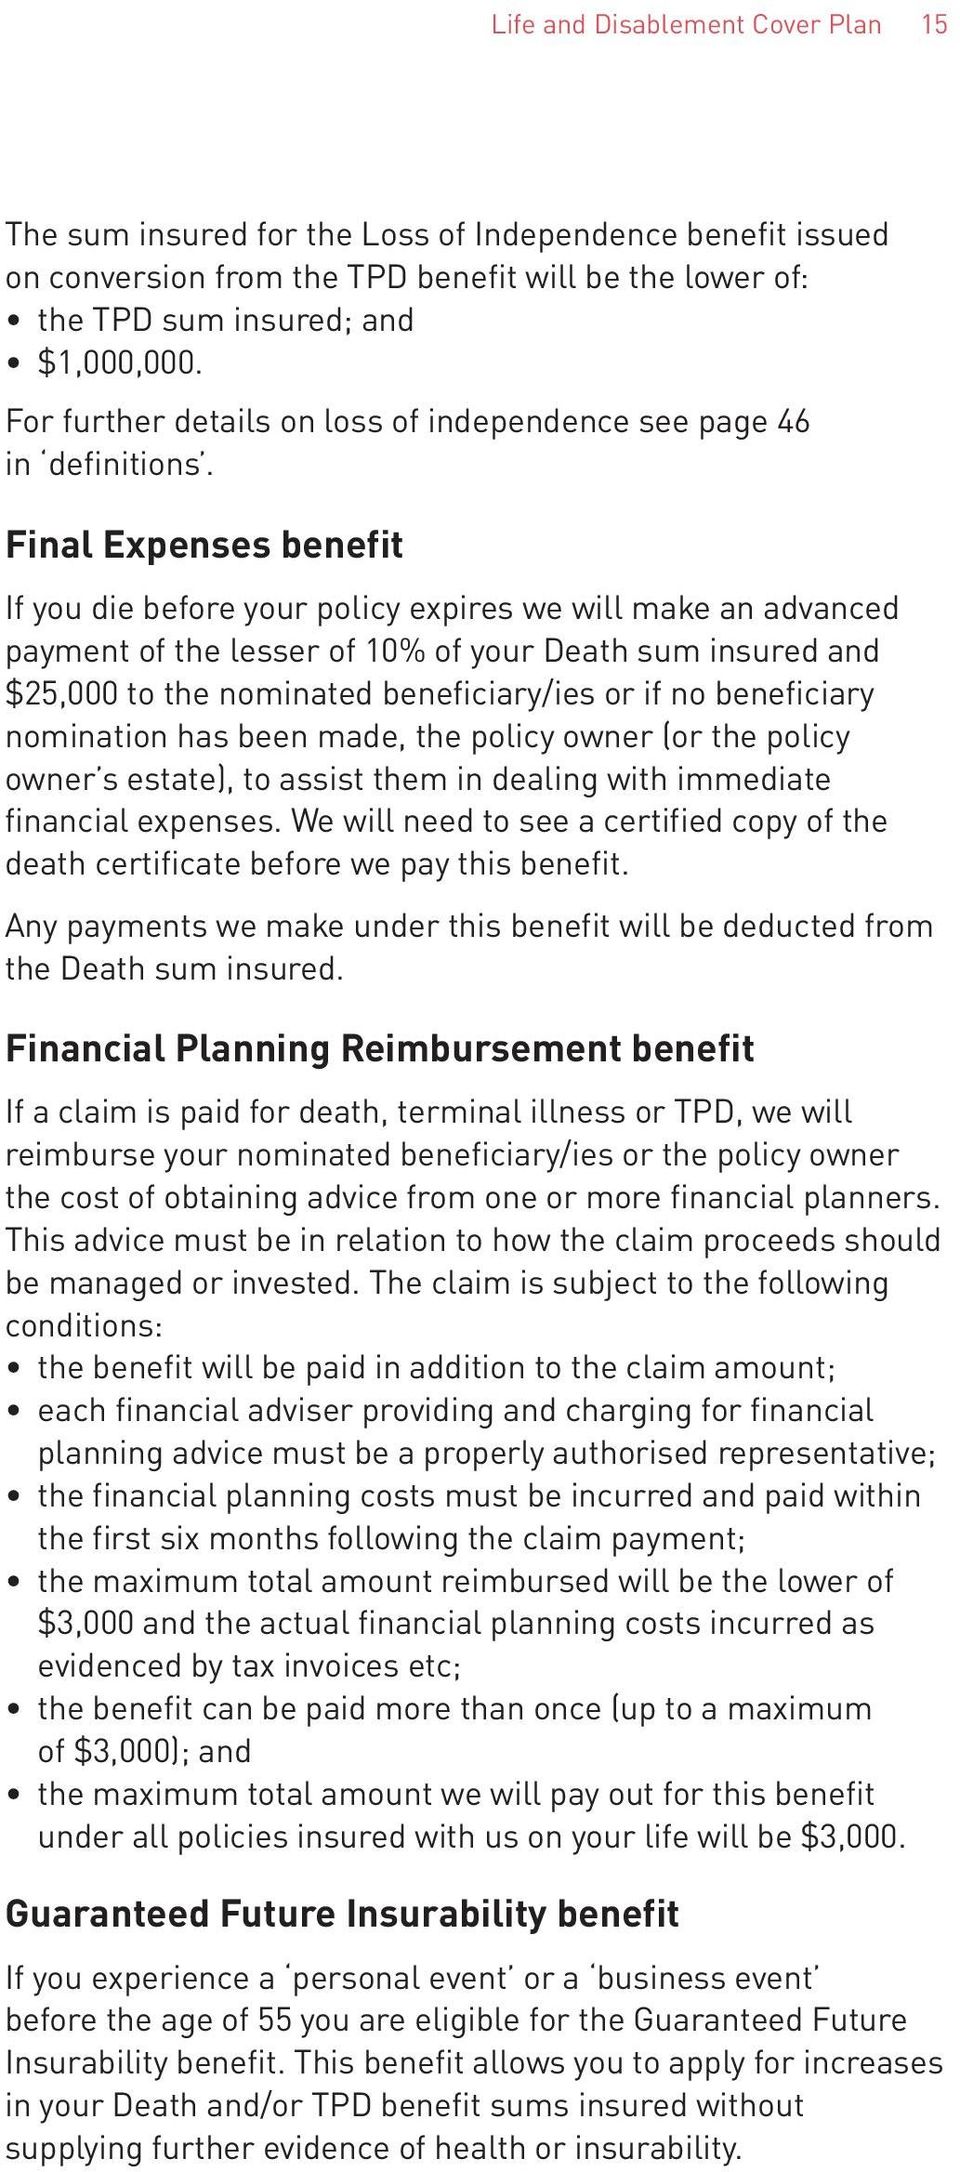 Final Expenses benefit If you die before your policy expires we will make an advanced payment of the lesser of 10% of your Death sum insured and $25,000 to the nominated beneficiary/ies or if no